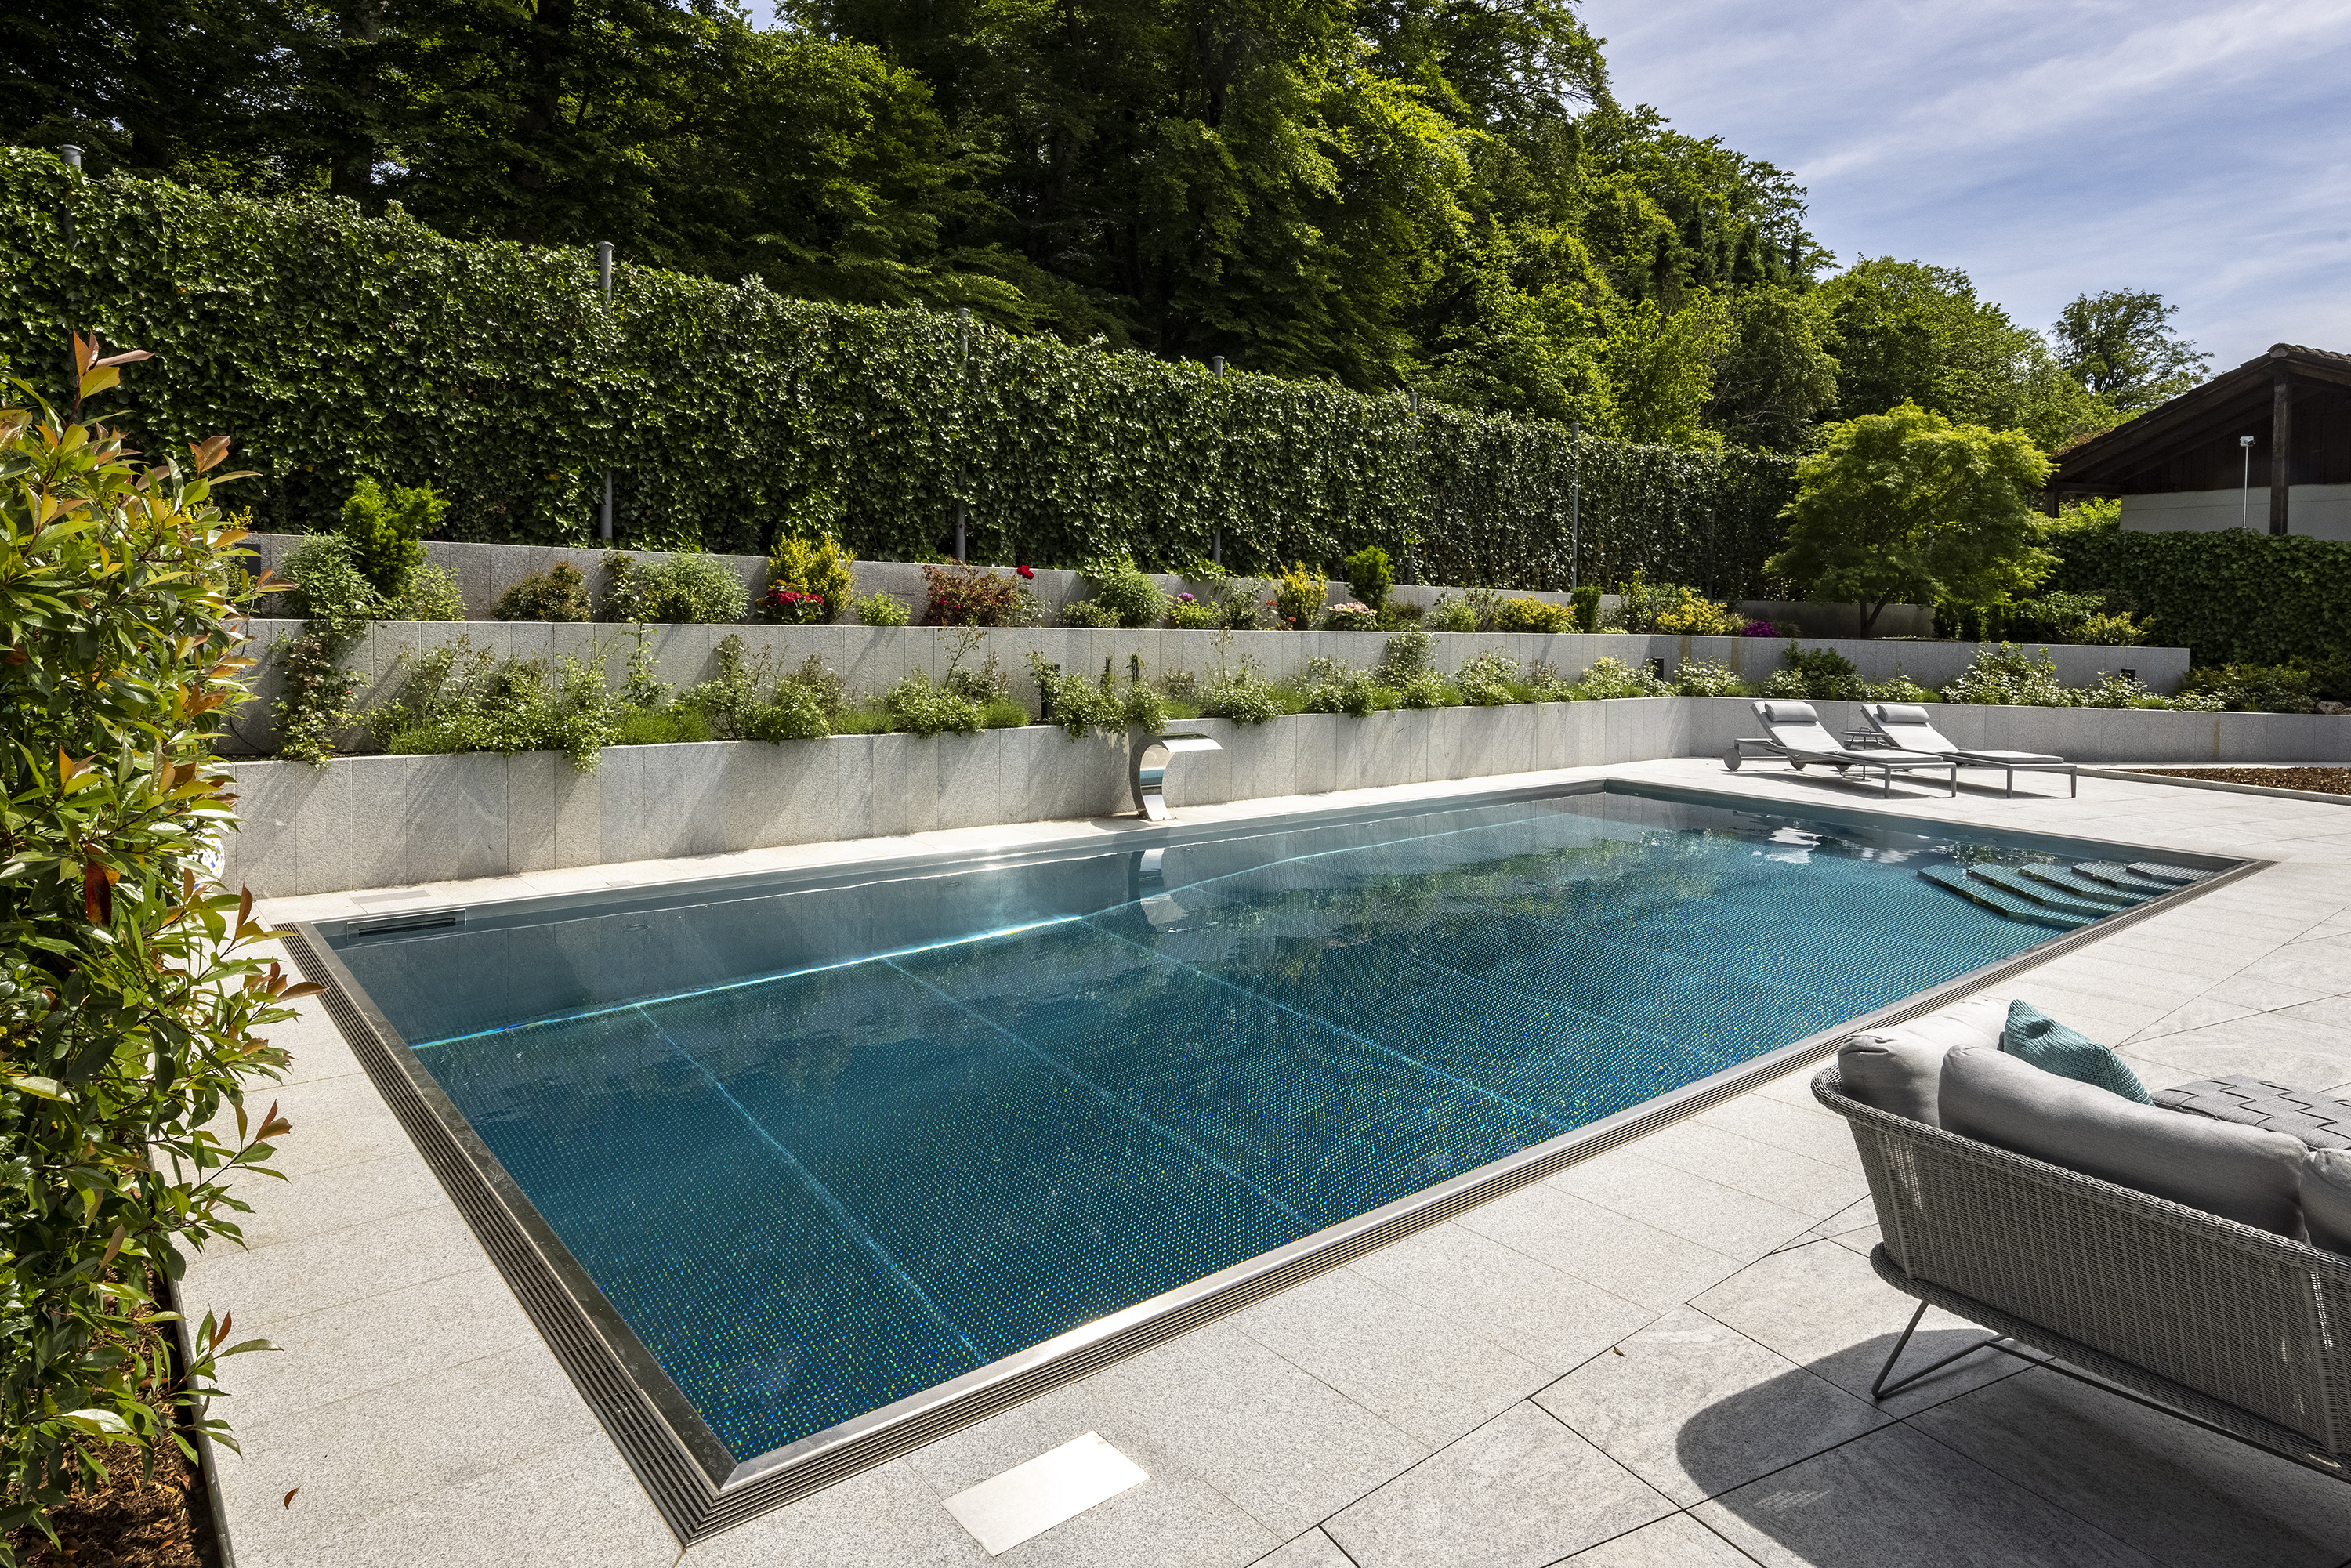 Stainless steel pool with a lowered bottom suitable for demanding swimmers | IMAGINOX GROUP